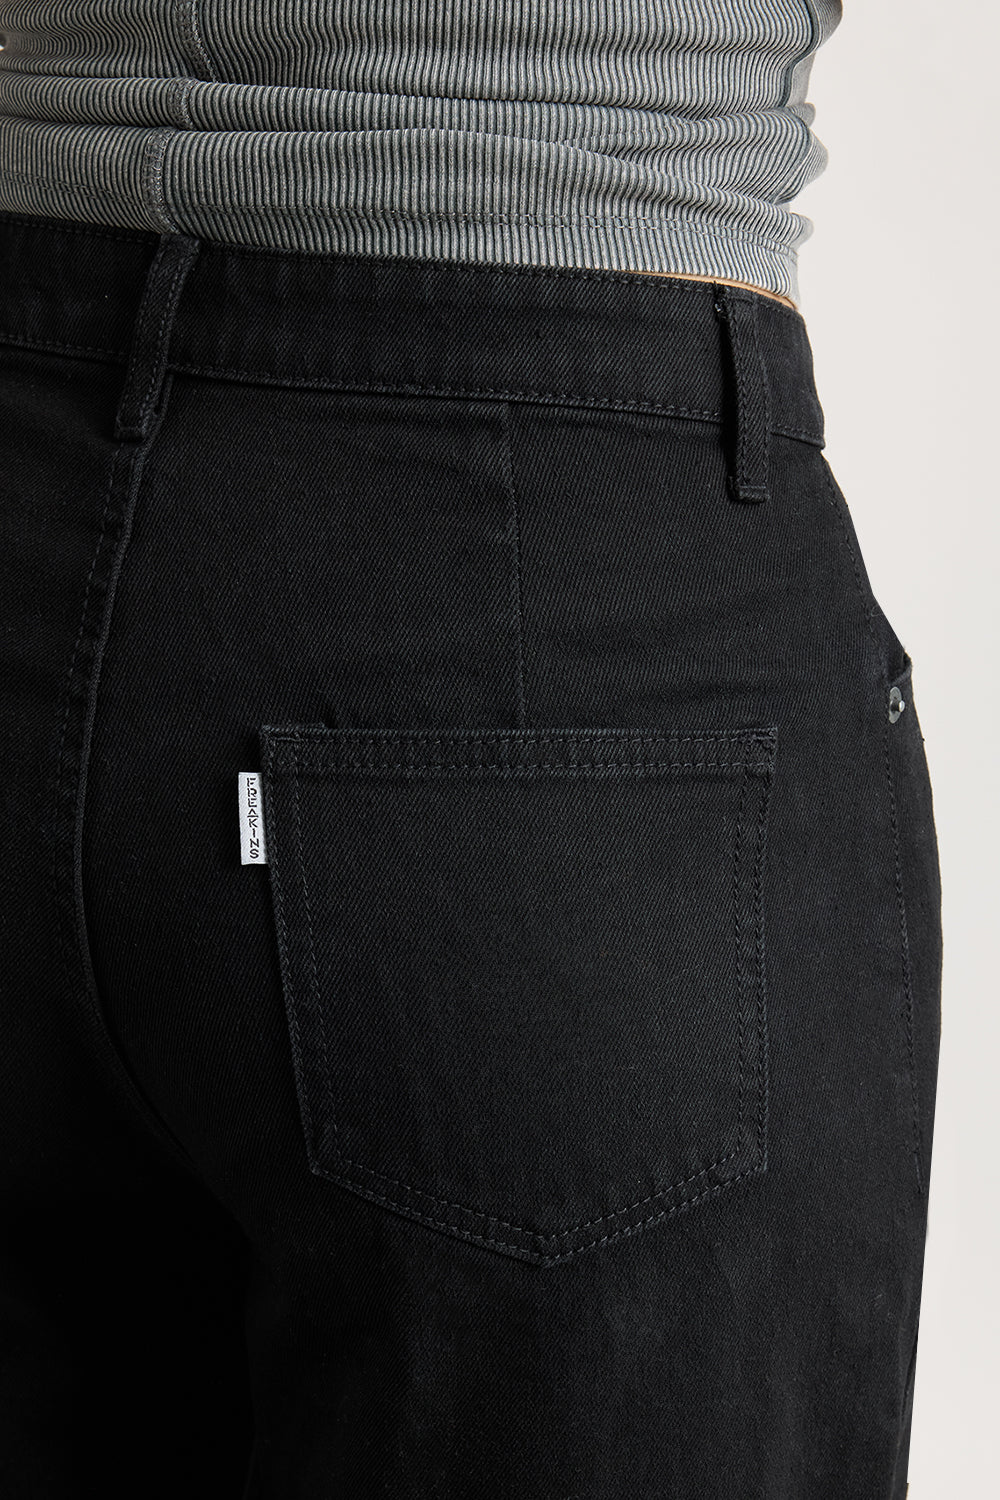 RELAXED DISTRESS BLACK JEANS